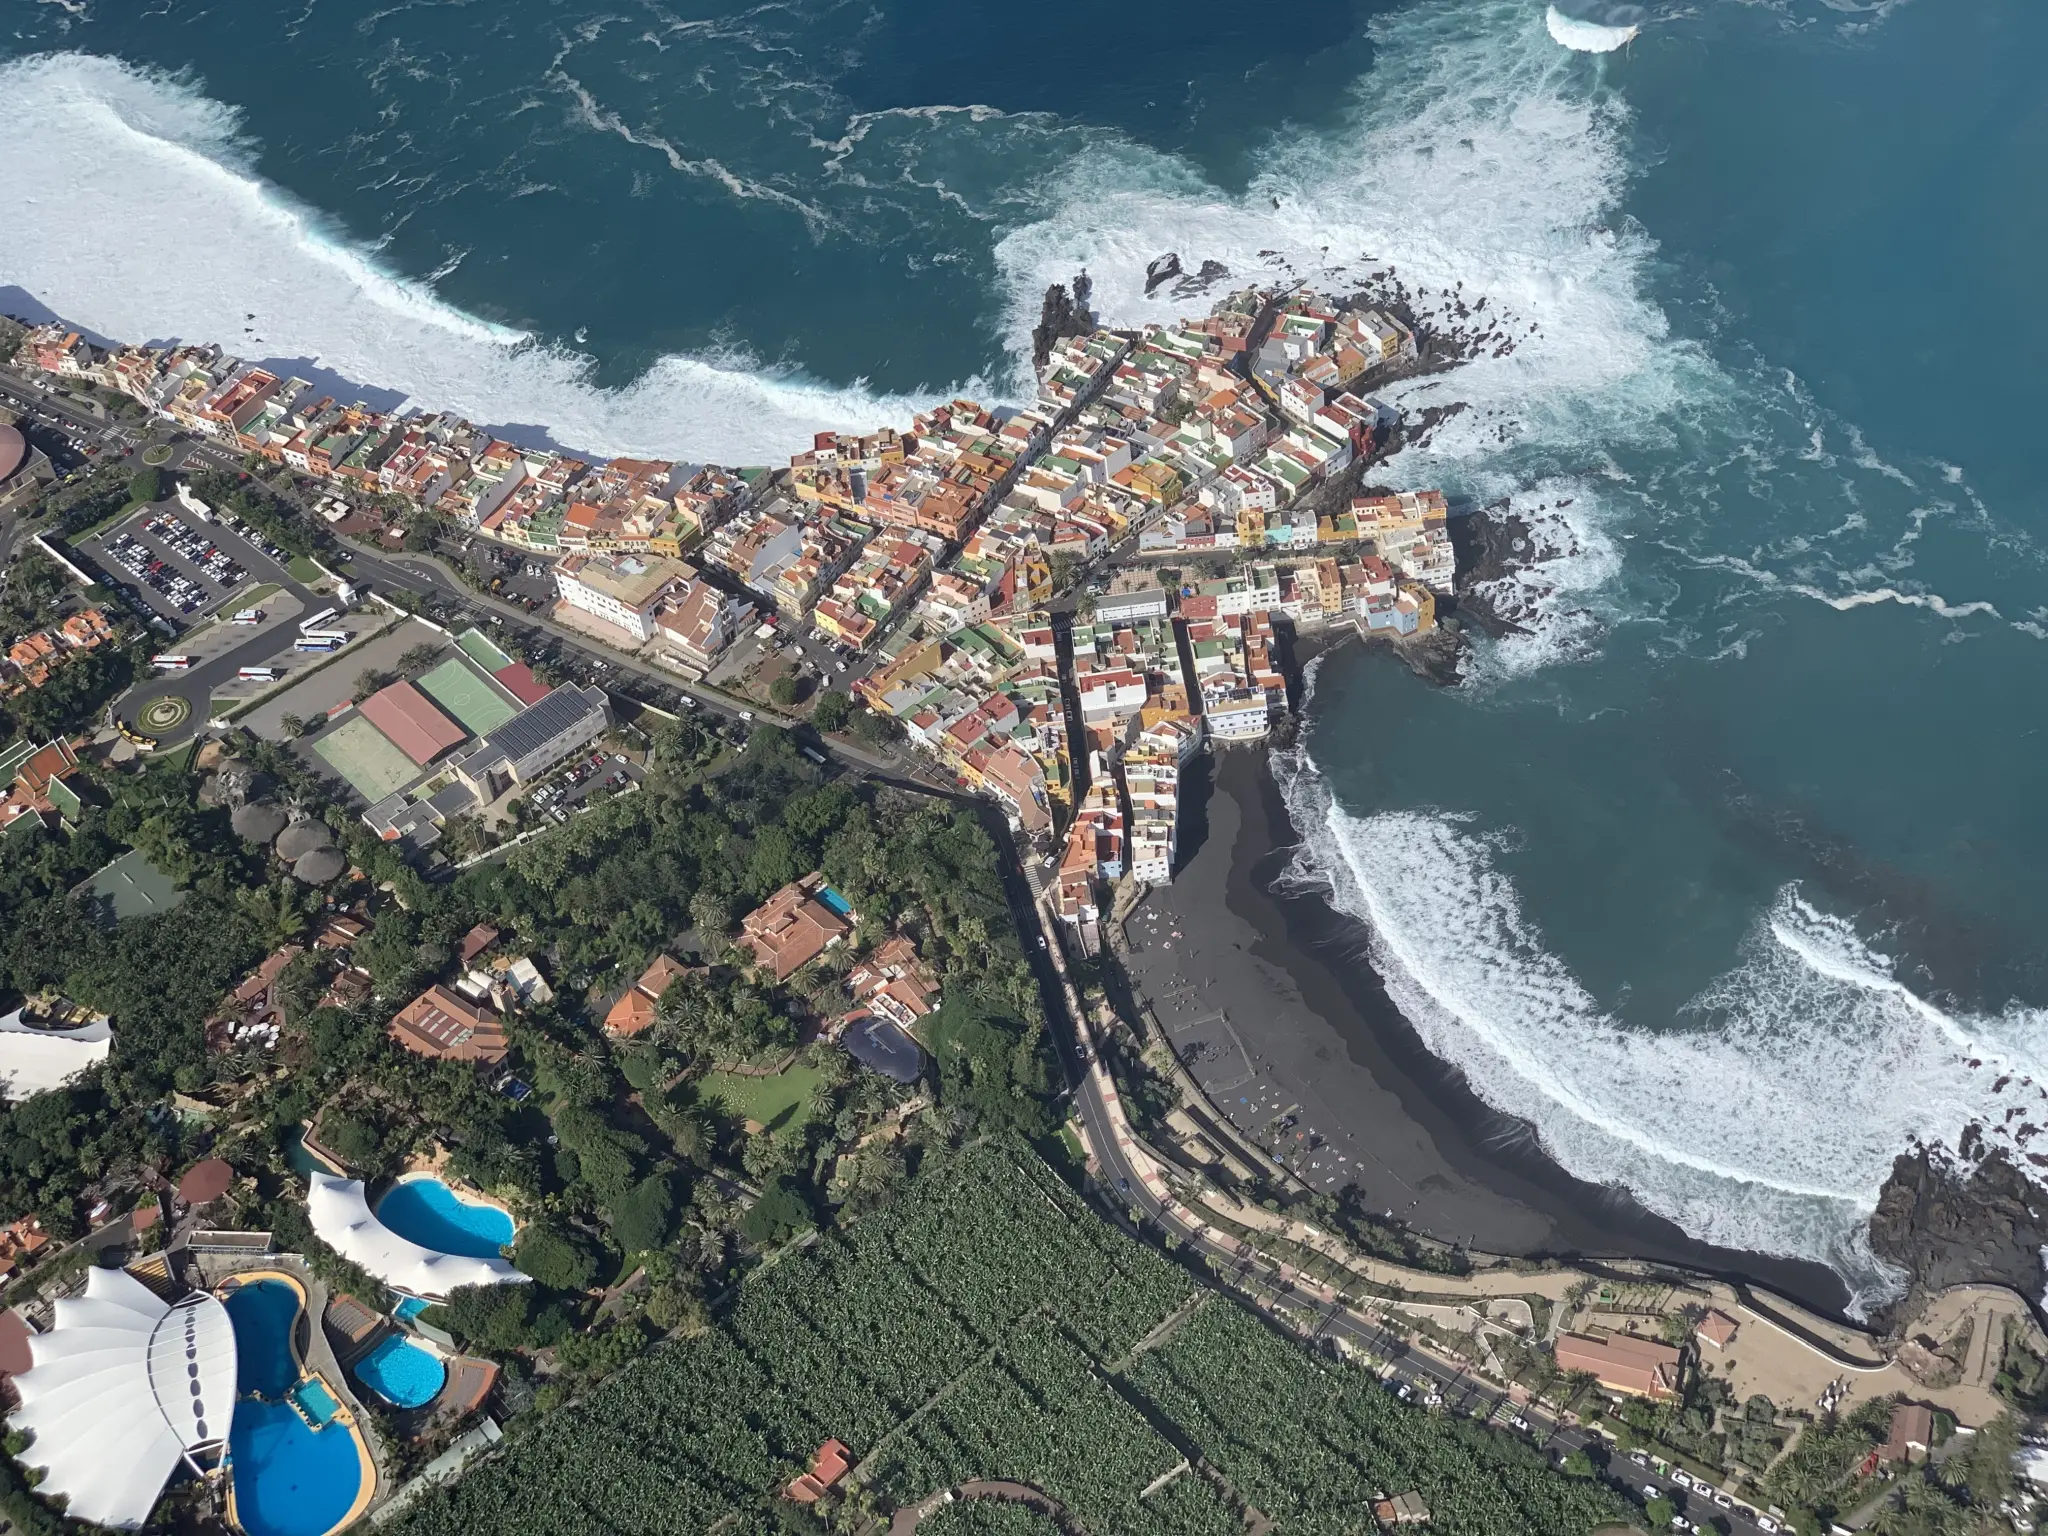 Flight week, paragliding trip Tenerife - an unforgettable experience Beach, Fly and Rock'n Roll Experience the carefree feeling of flying and get to know the charming landscapes of the largest of all Canary Islands from the bird's eye view.